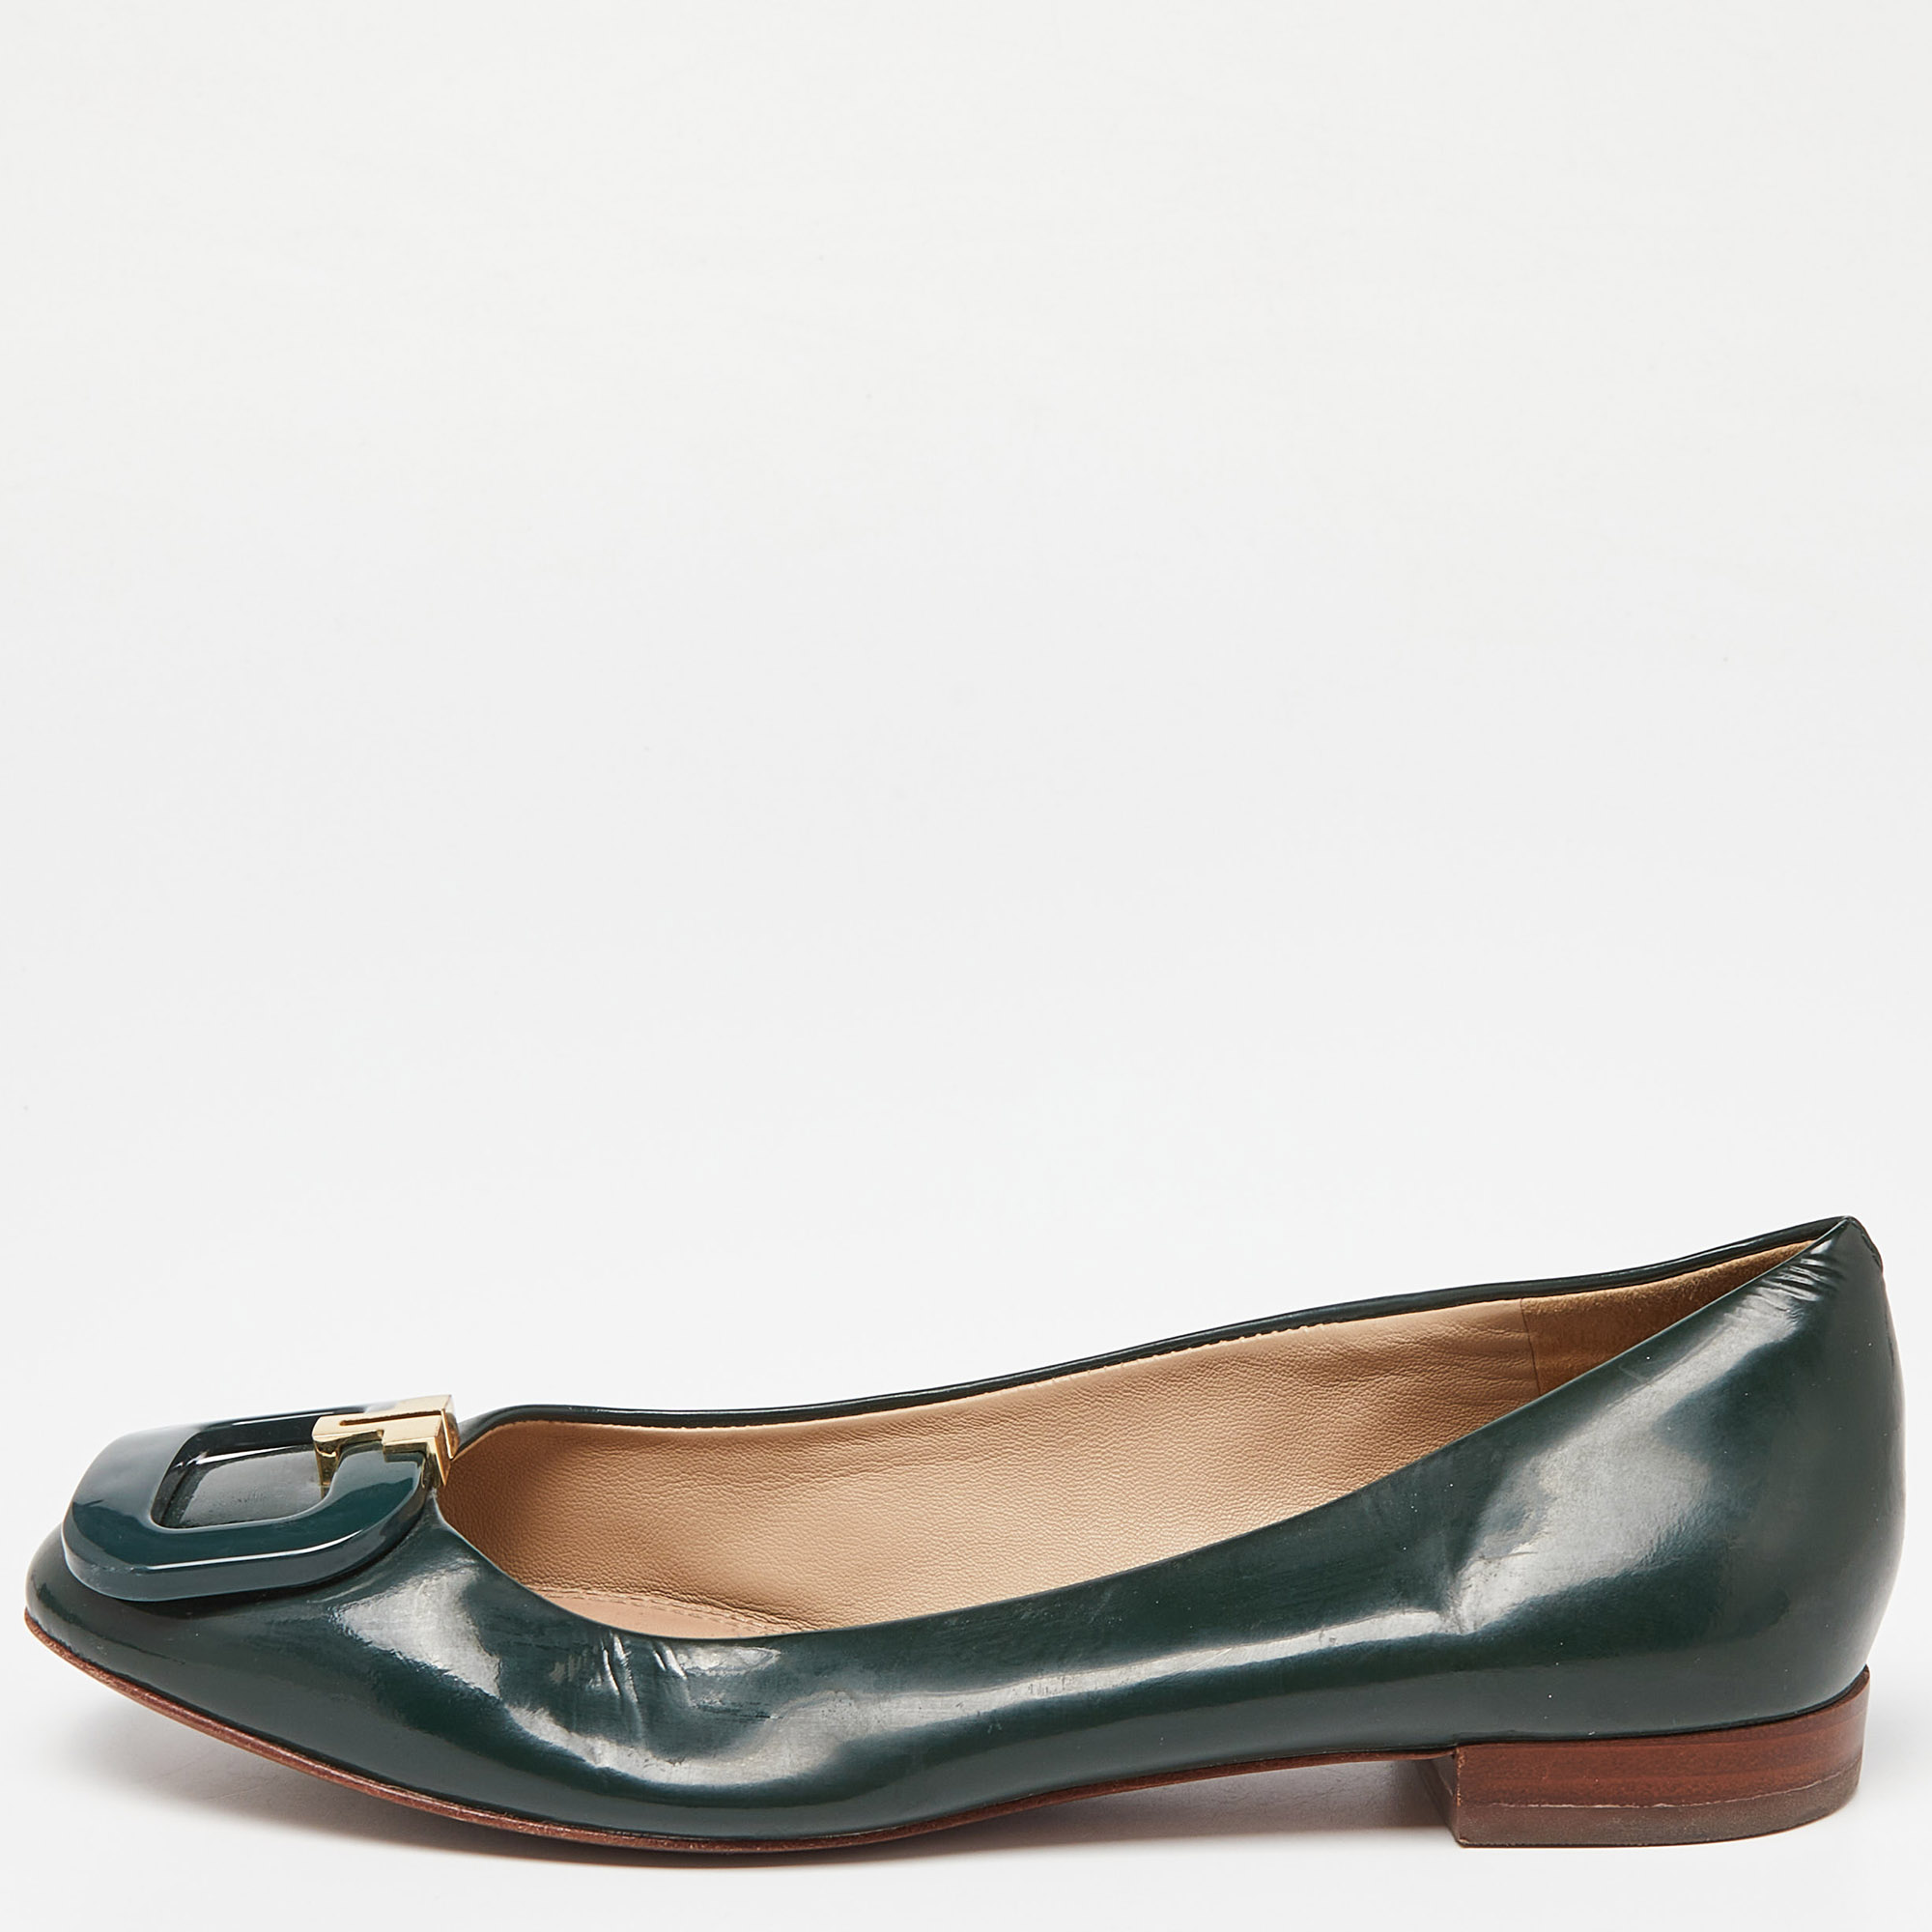 Pre-owned Tory Burch Green Patent Leather Ballet Flats Size 37